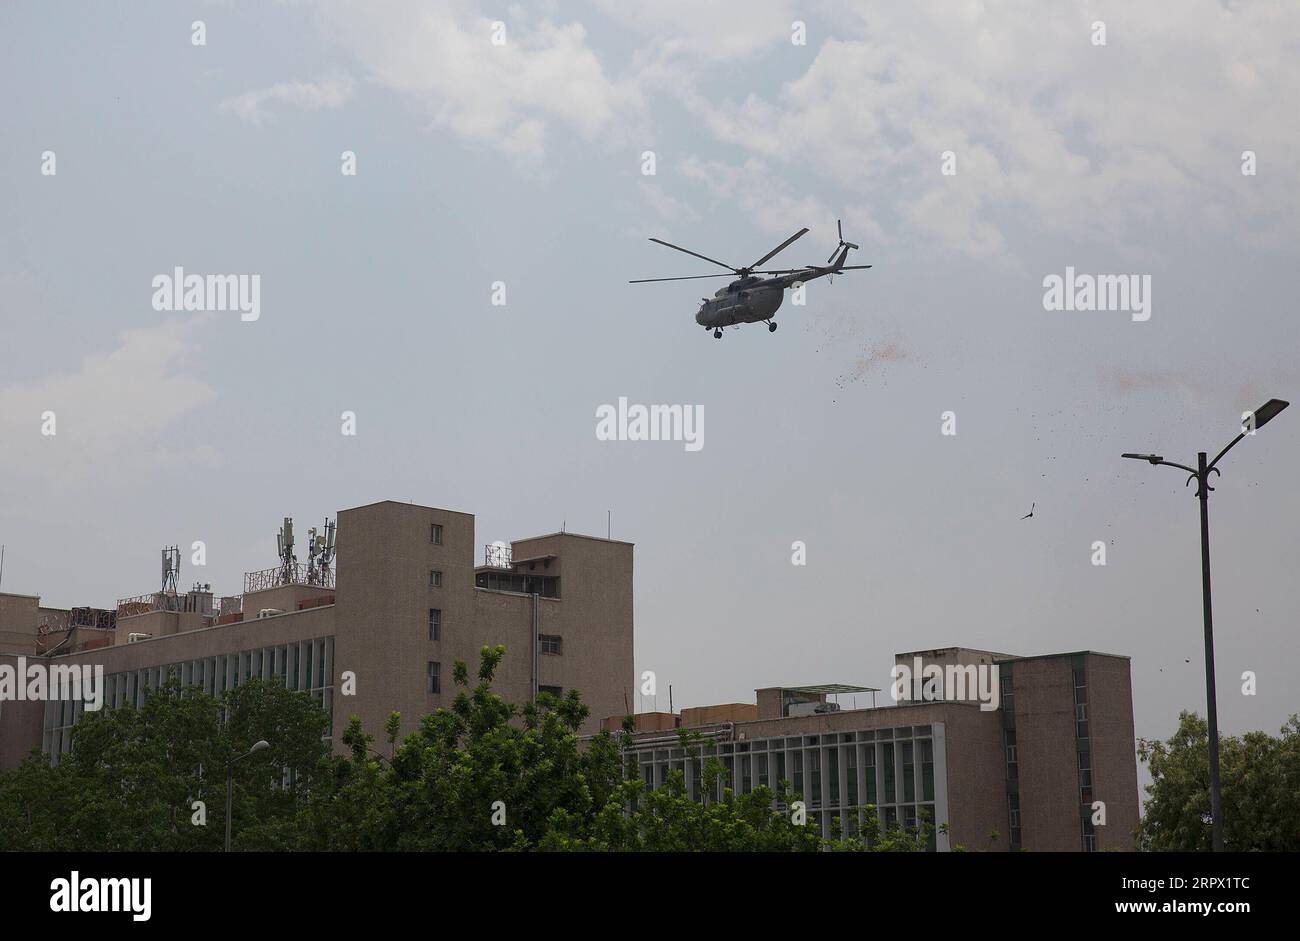 200503 -- NEW DELHI, May 3, 2020 Xinhua -- An Indian Air Force helicopter showers flower petals at the All India Institute of Medical Sciences AIIMS to pay tribute to doctors, nurses and police personnel who battle against COVID-19 pandemic in New Delhi, India, May 3, 2020. Photo by Javed Dar/Xinhua INDIA-NEW DELHI-COVID-19-TRIBUTE PUBLICATIONxNOTxINxCHN Stock Photo